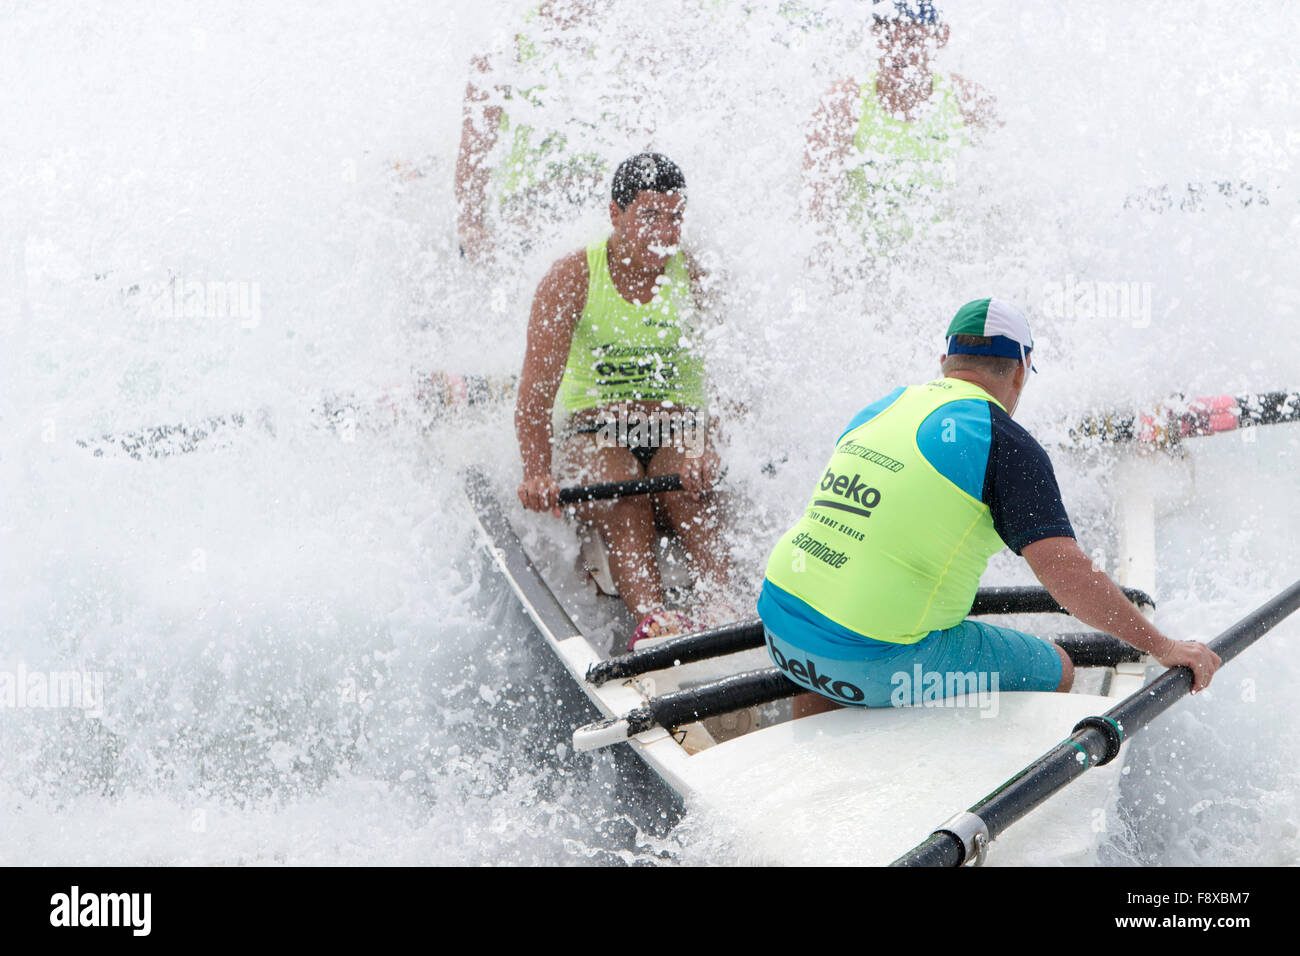 Sydney, Australia. 12th December, 2015. Ocean Thunder Annual Series of Professional surfboat racing from Dee Why Beach which involves 24 elite mens teams and 12 elite womens teams from around Australia. Mens team drenched as the boat hits large wave and the sweep struggles to maintain control of the surfboat Credit:  model10/Alamy Live News Stock Photo